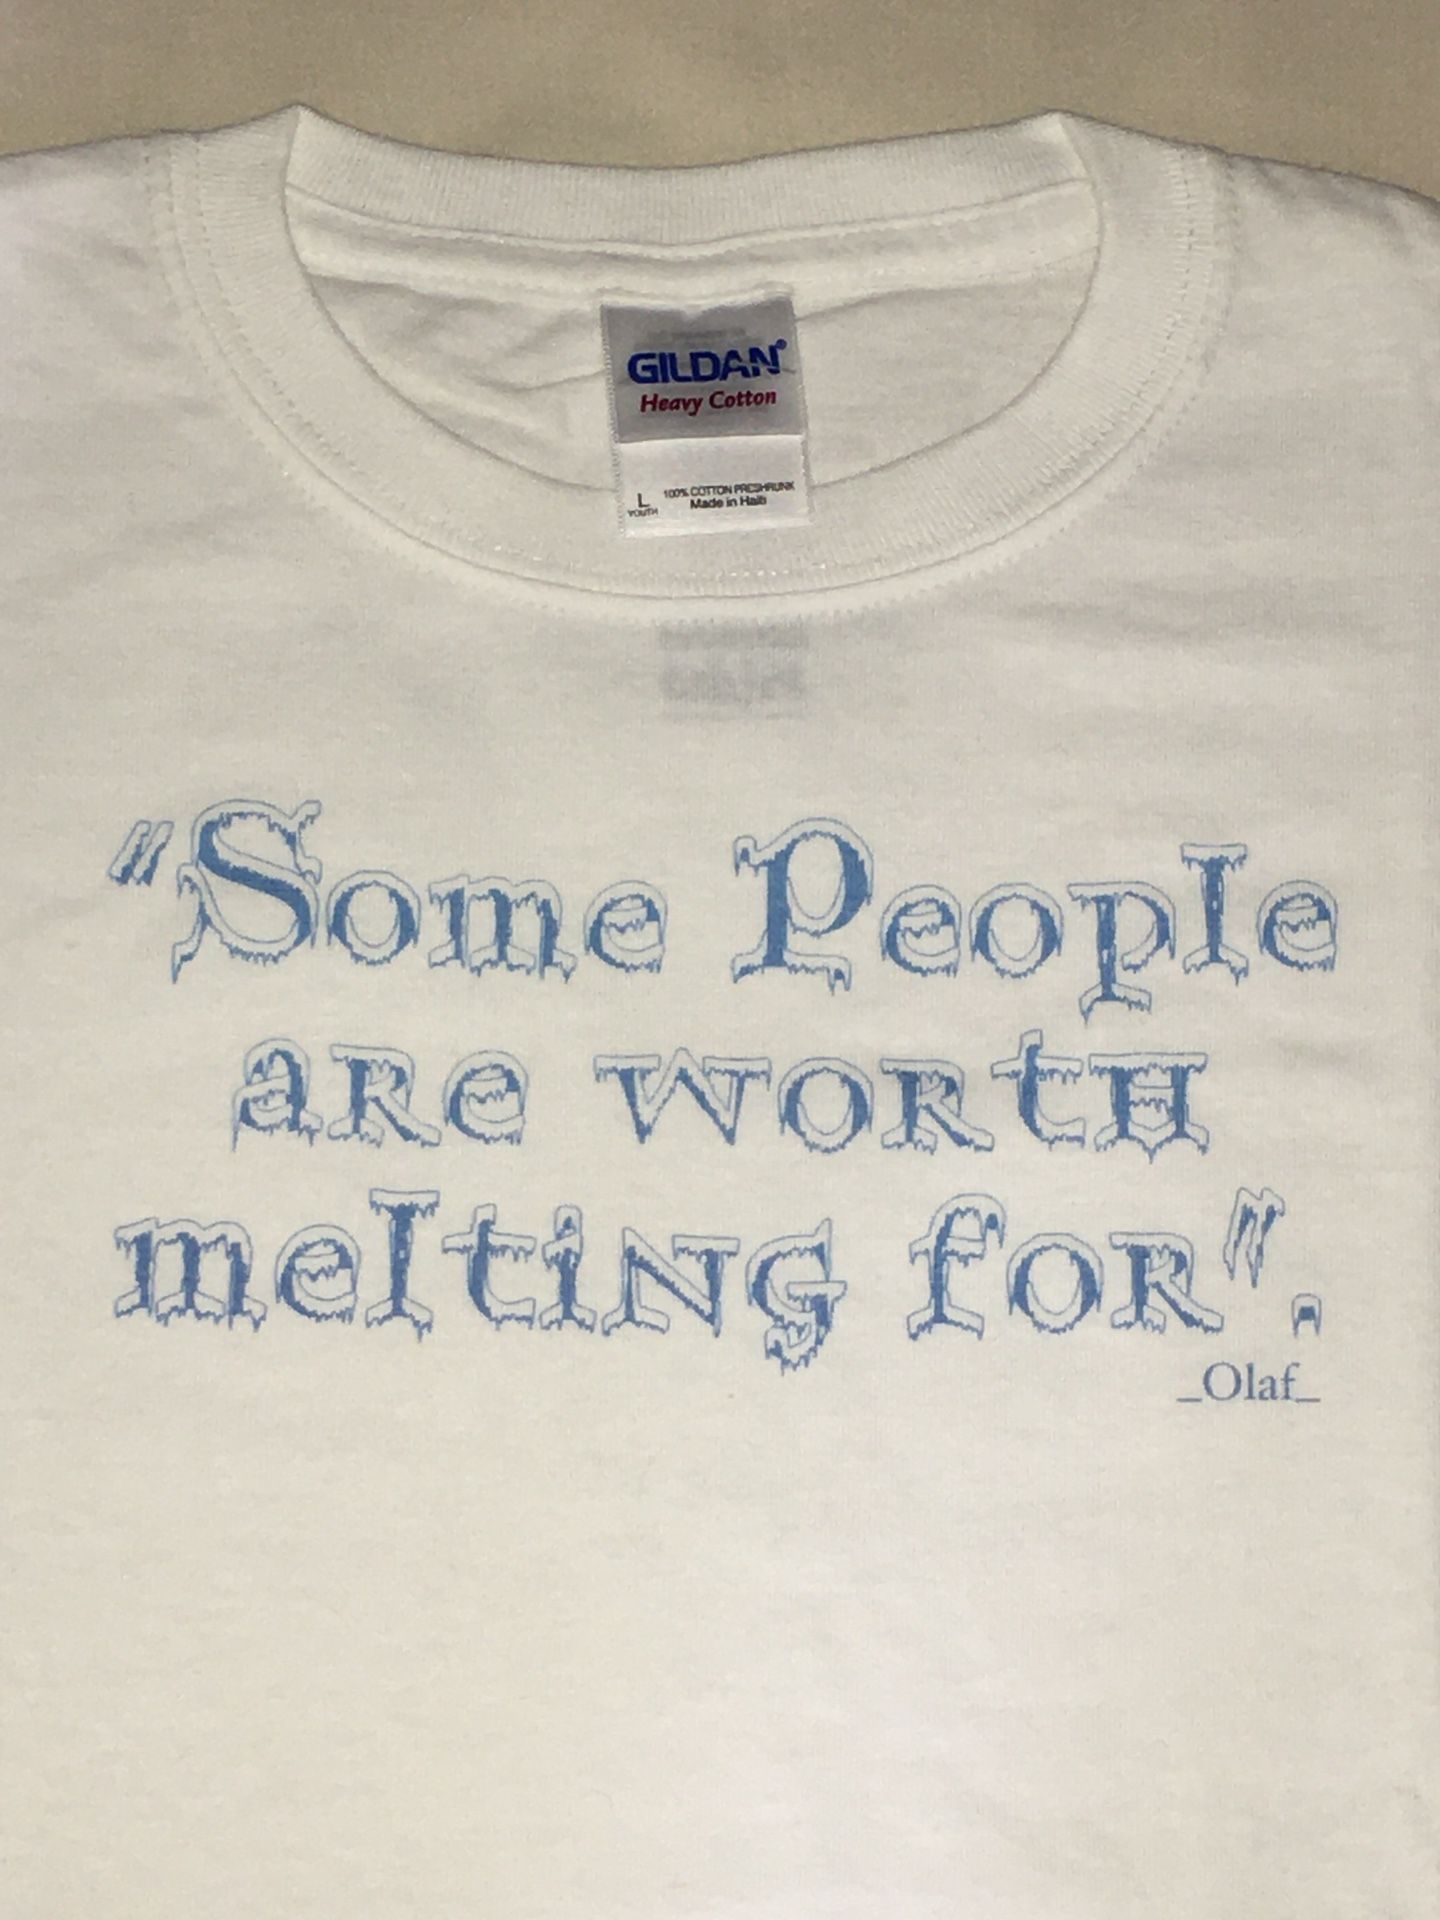 NEW KID YOUTH WHITE TSHIRT L 10 12 — Printed in USA — OLAF FROZEN Quote